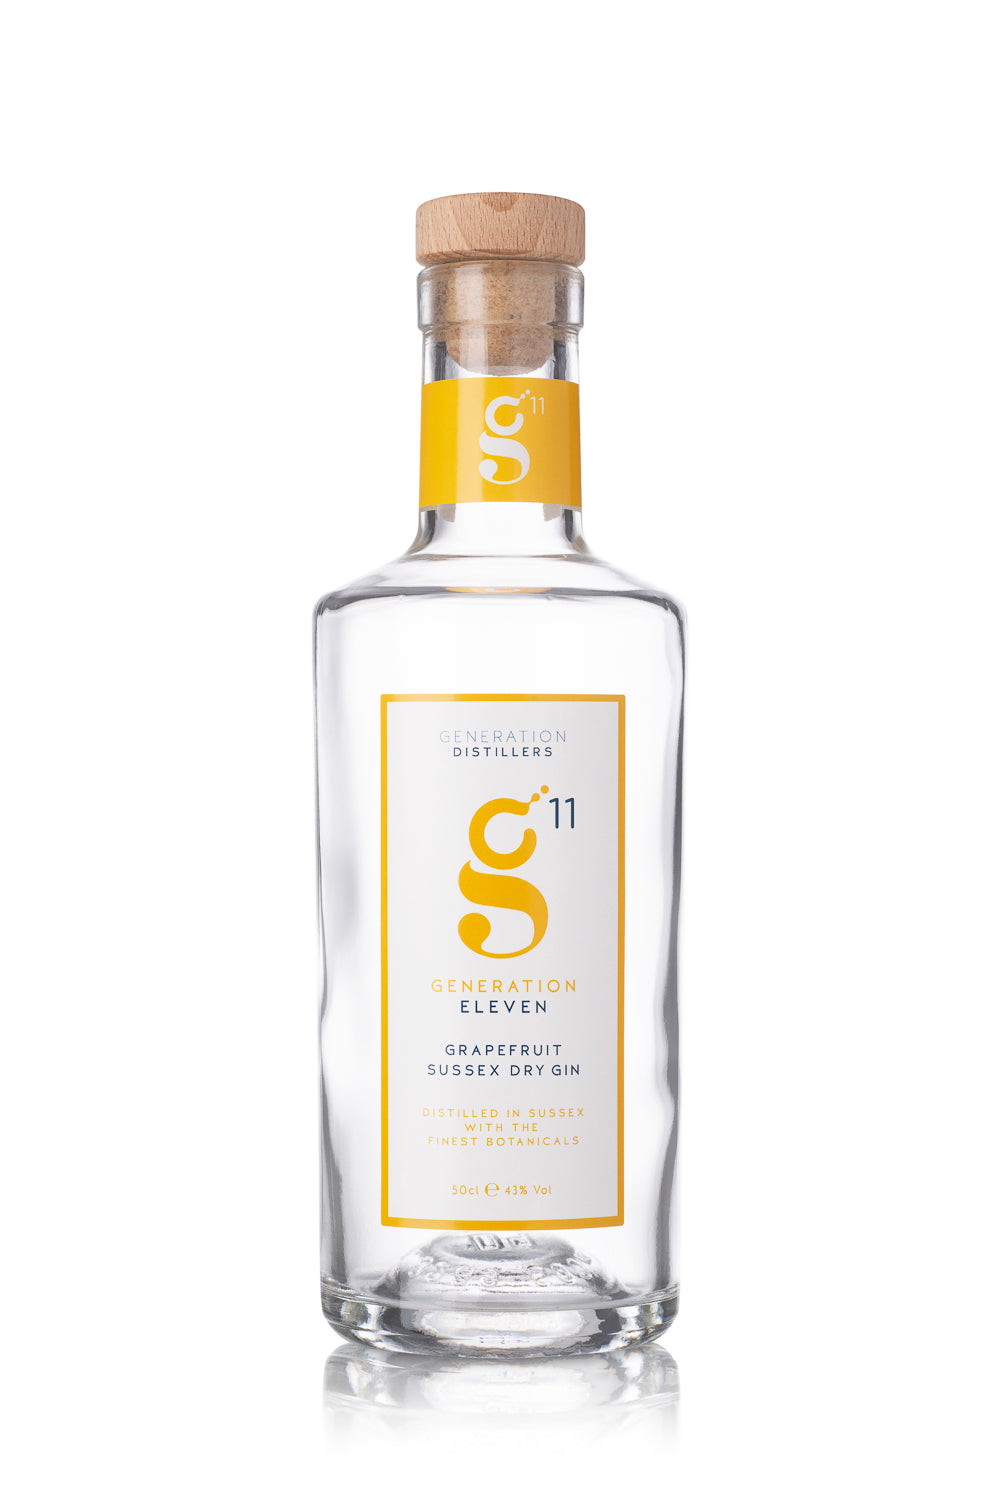 Generation 11 Grapefruit Sussex Dry Gin 50cl